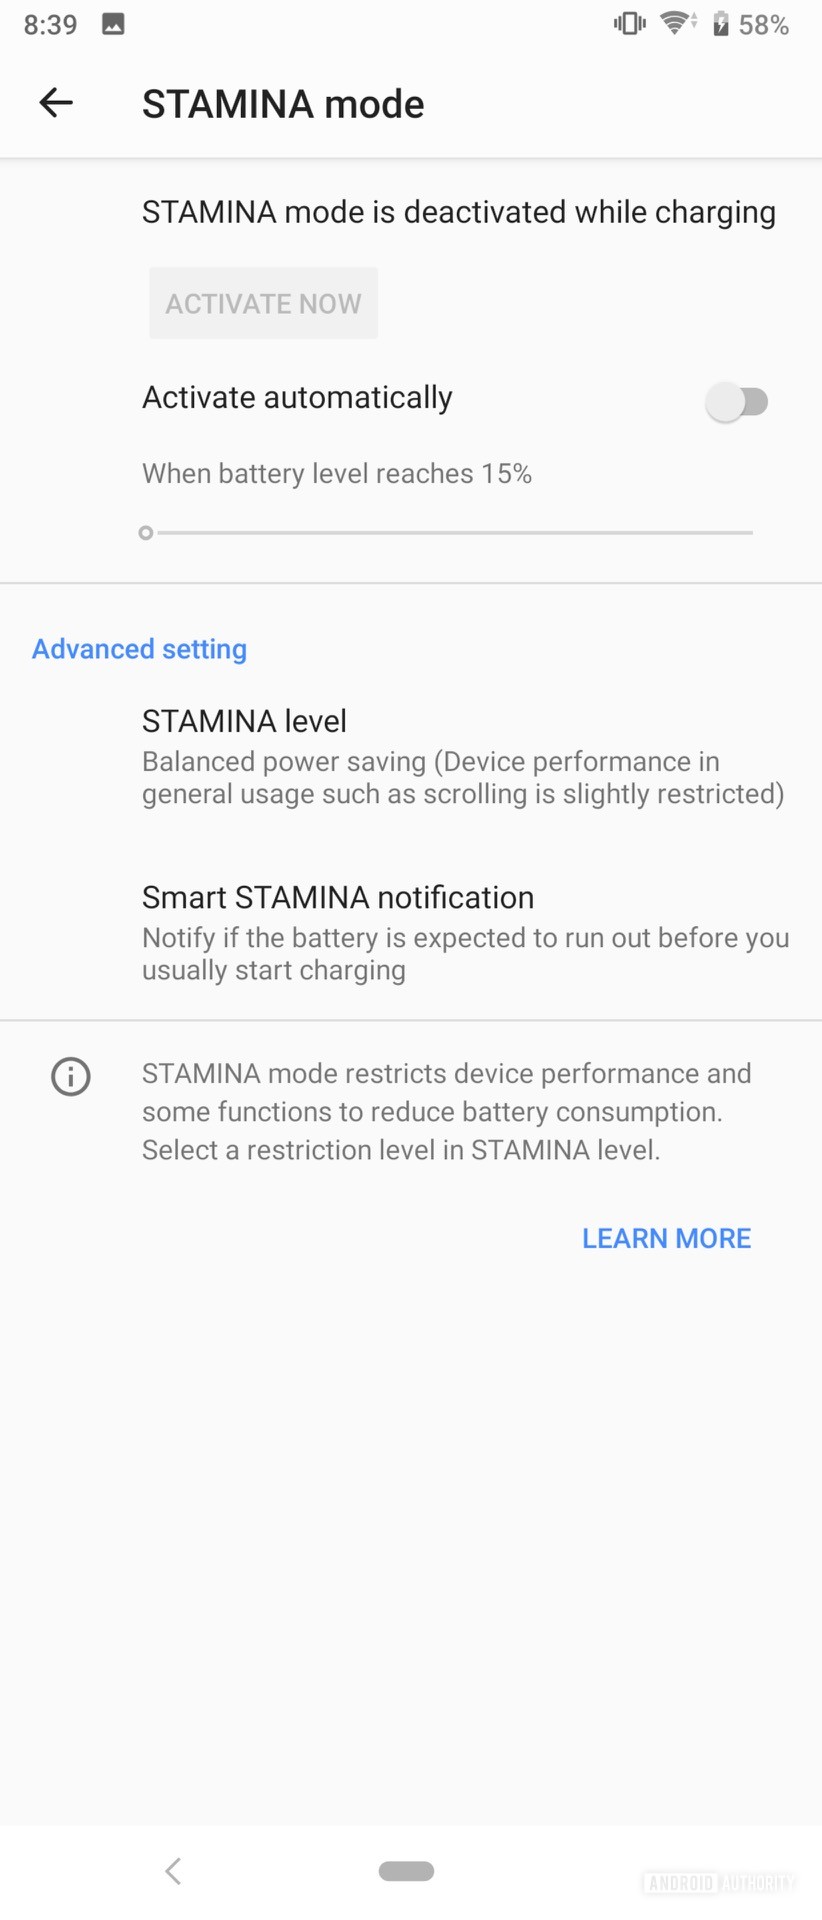 Sony Xperia 1 Review Stamina Mode Settings